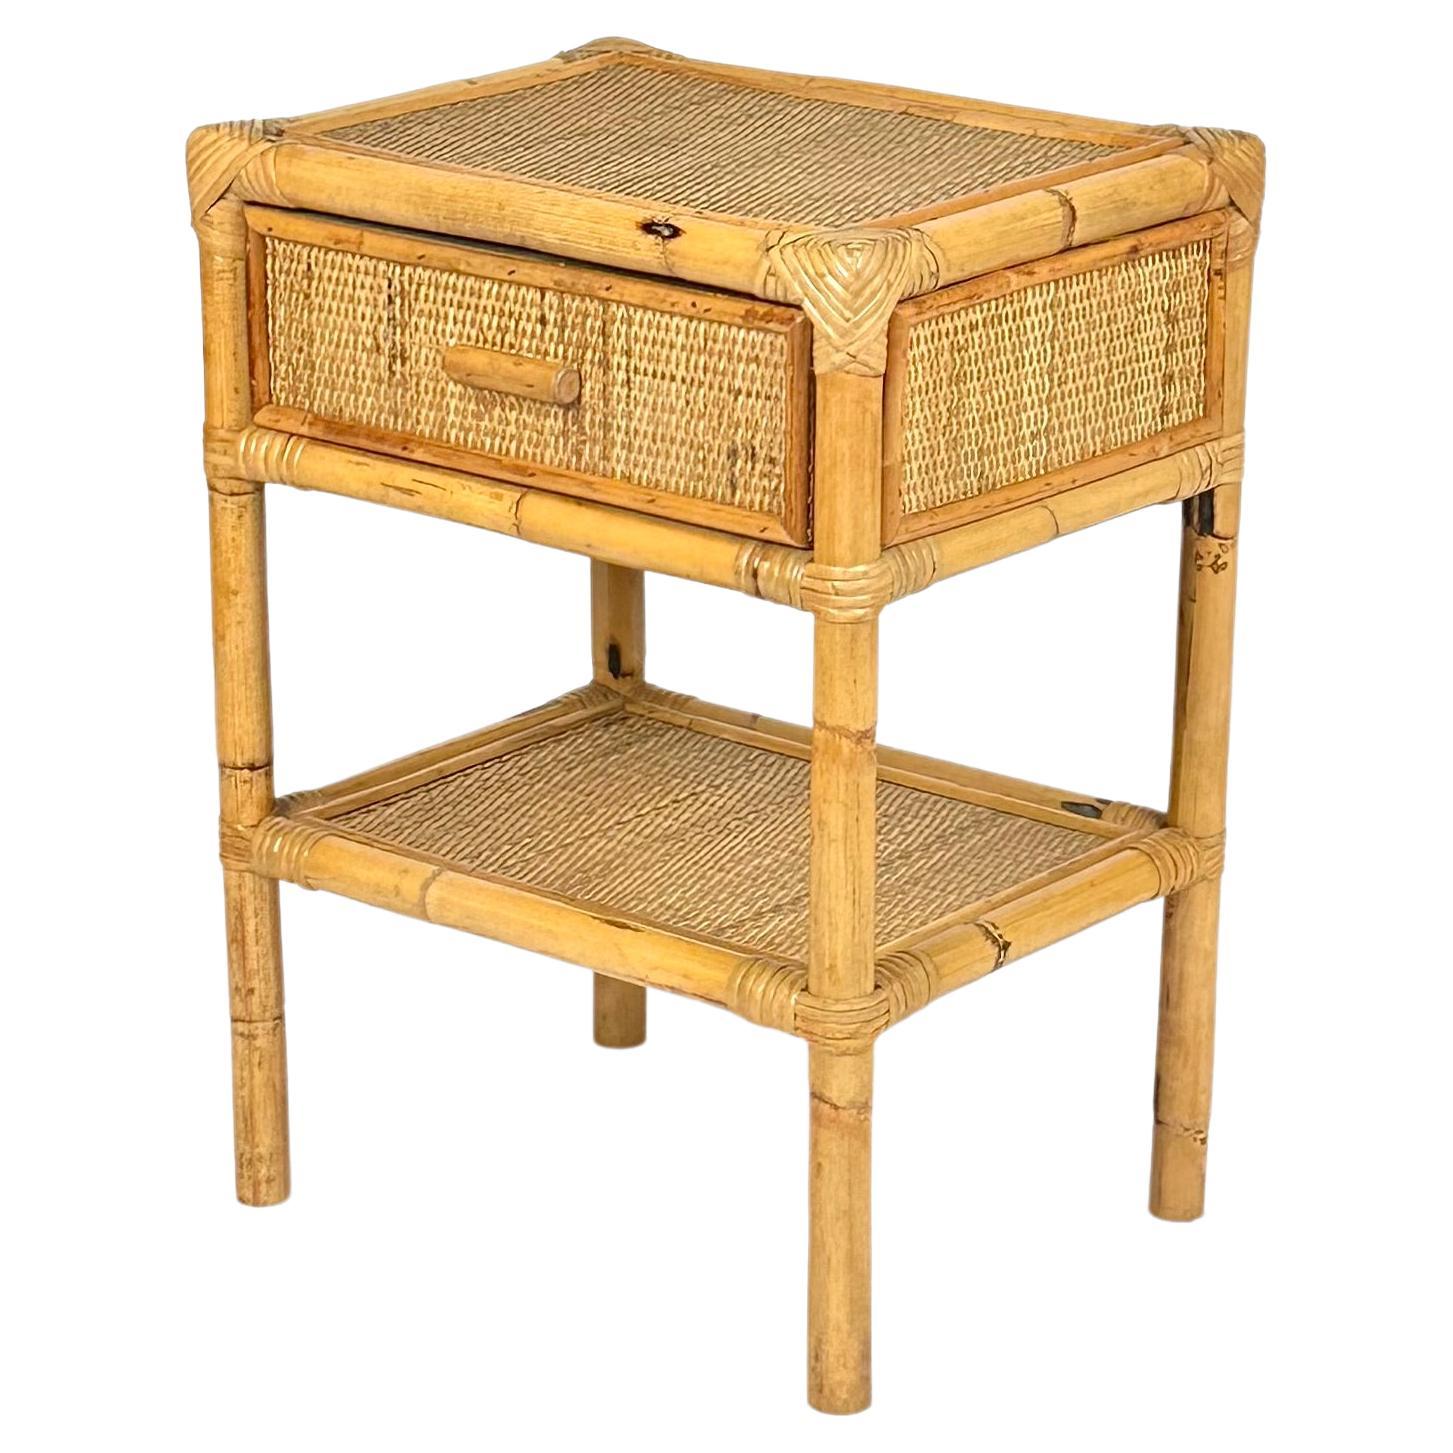 Midcentury bedside table nightstands in bamboo and rattan with drawer and bottom shelf .

Made in Italy in the 1970s.

Perfect in any room as well as next to a sofa or in any bathroom.